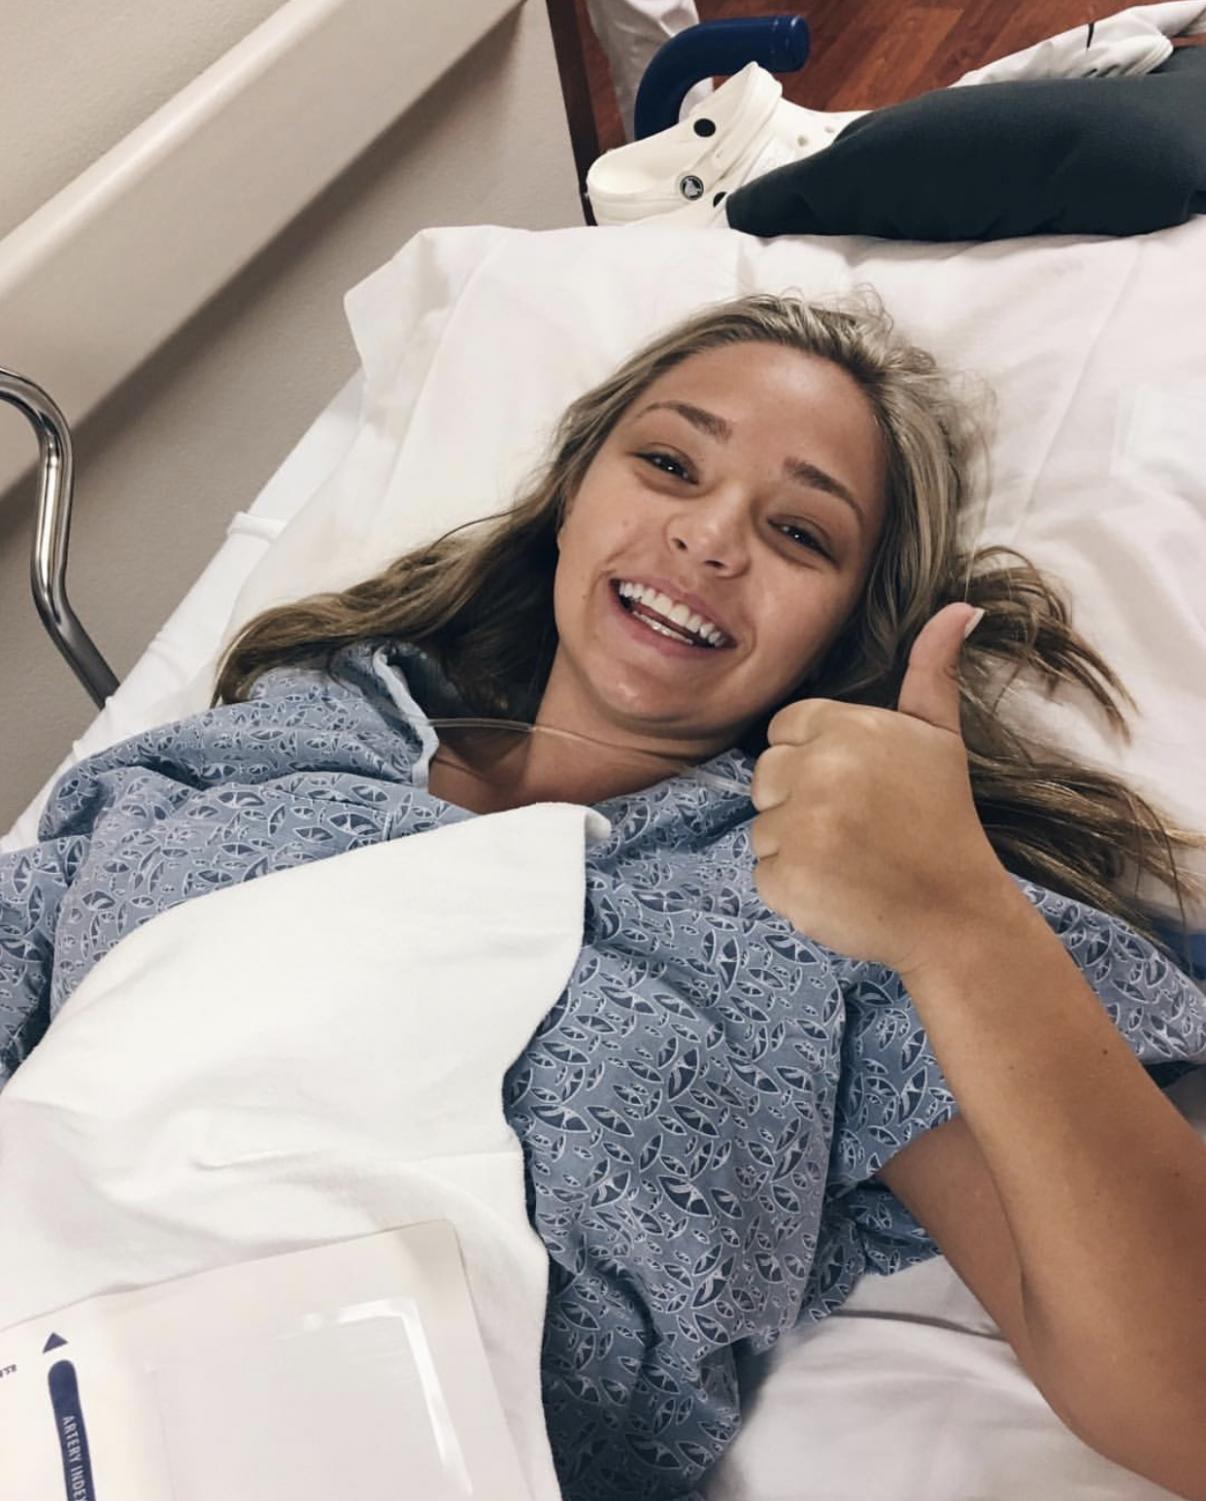 Ally Perkins holds a thumb up after her appendix surgery. She stays postivie through prayer and worship during her hospital visits.